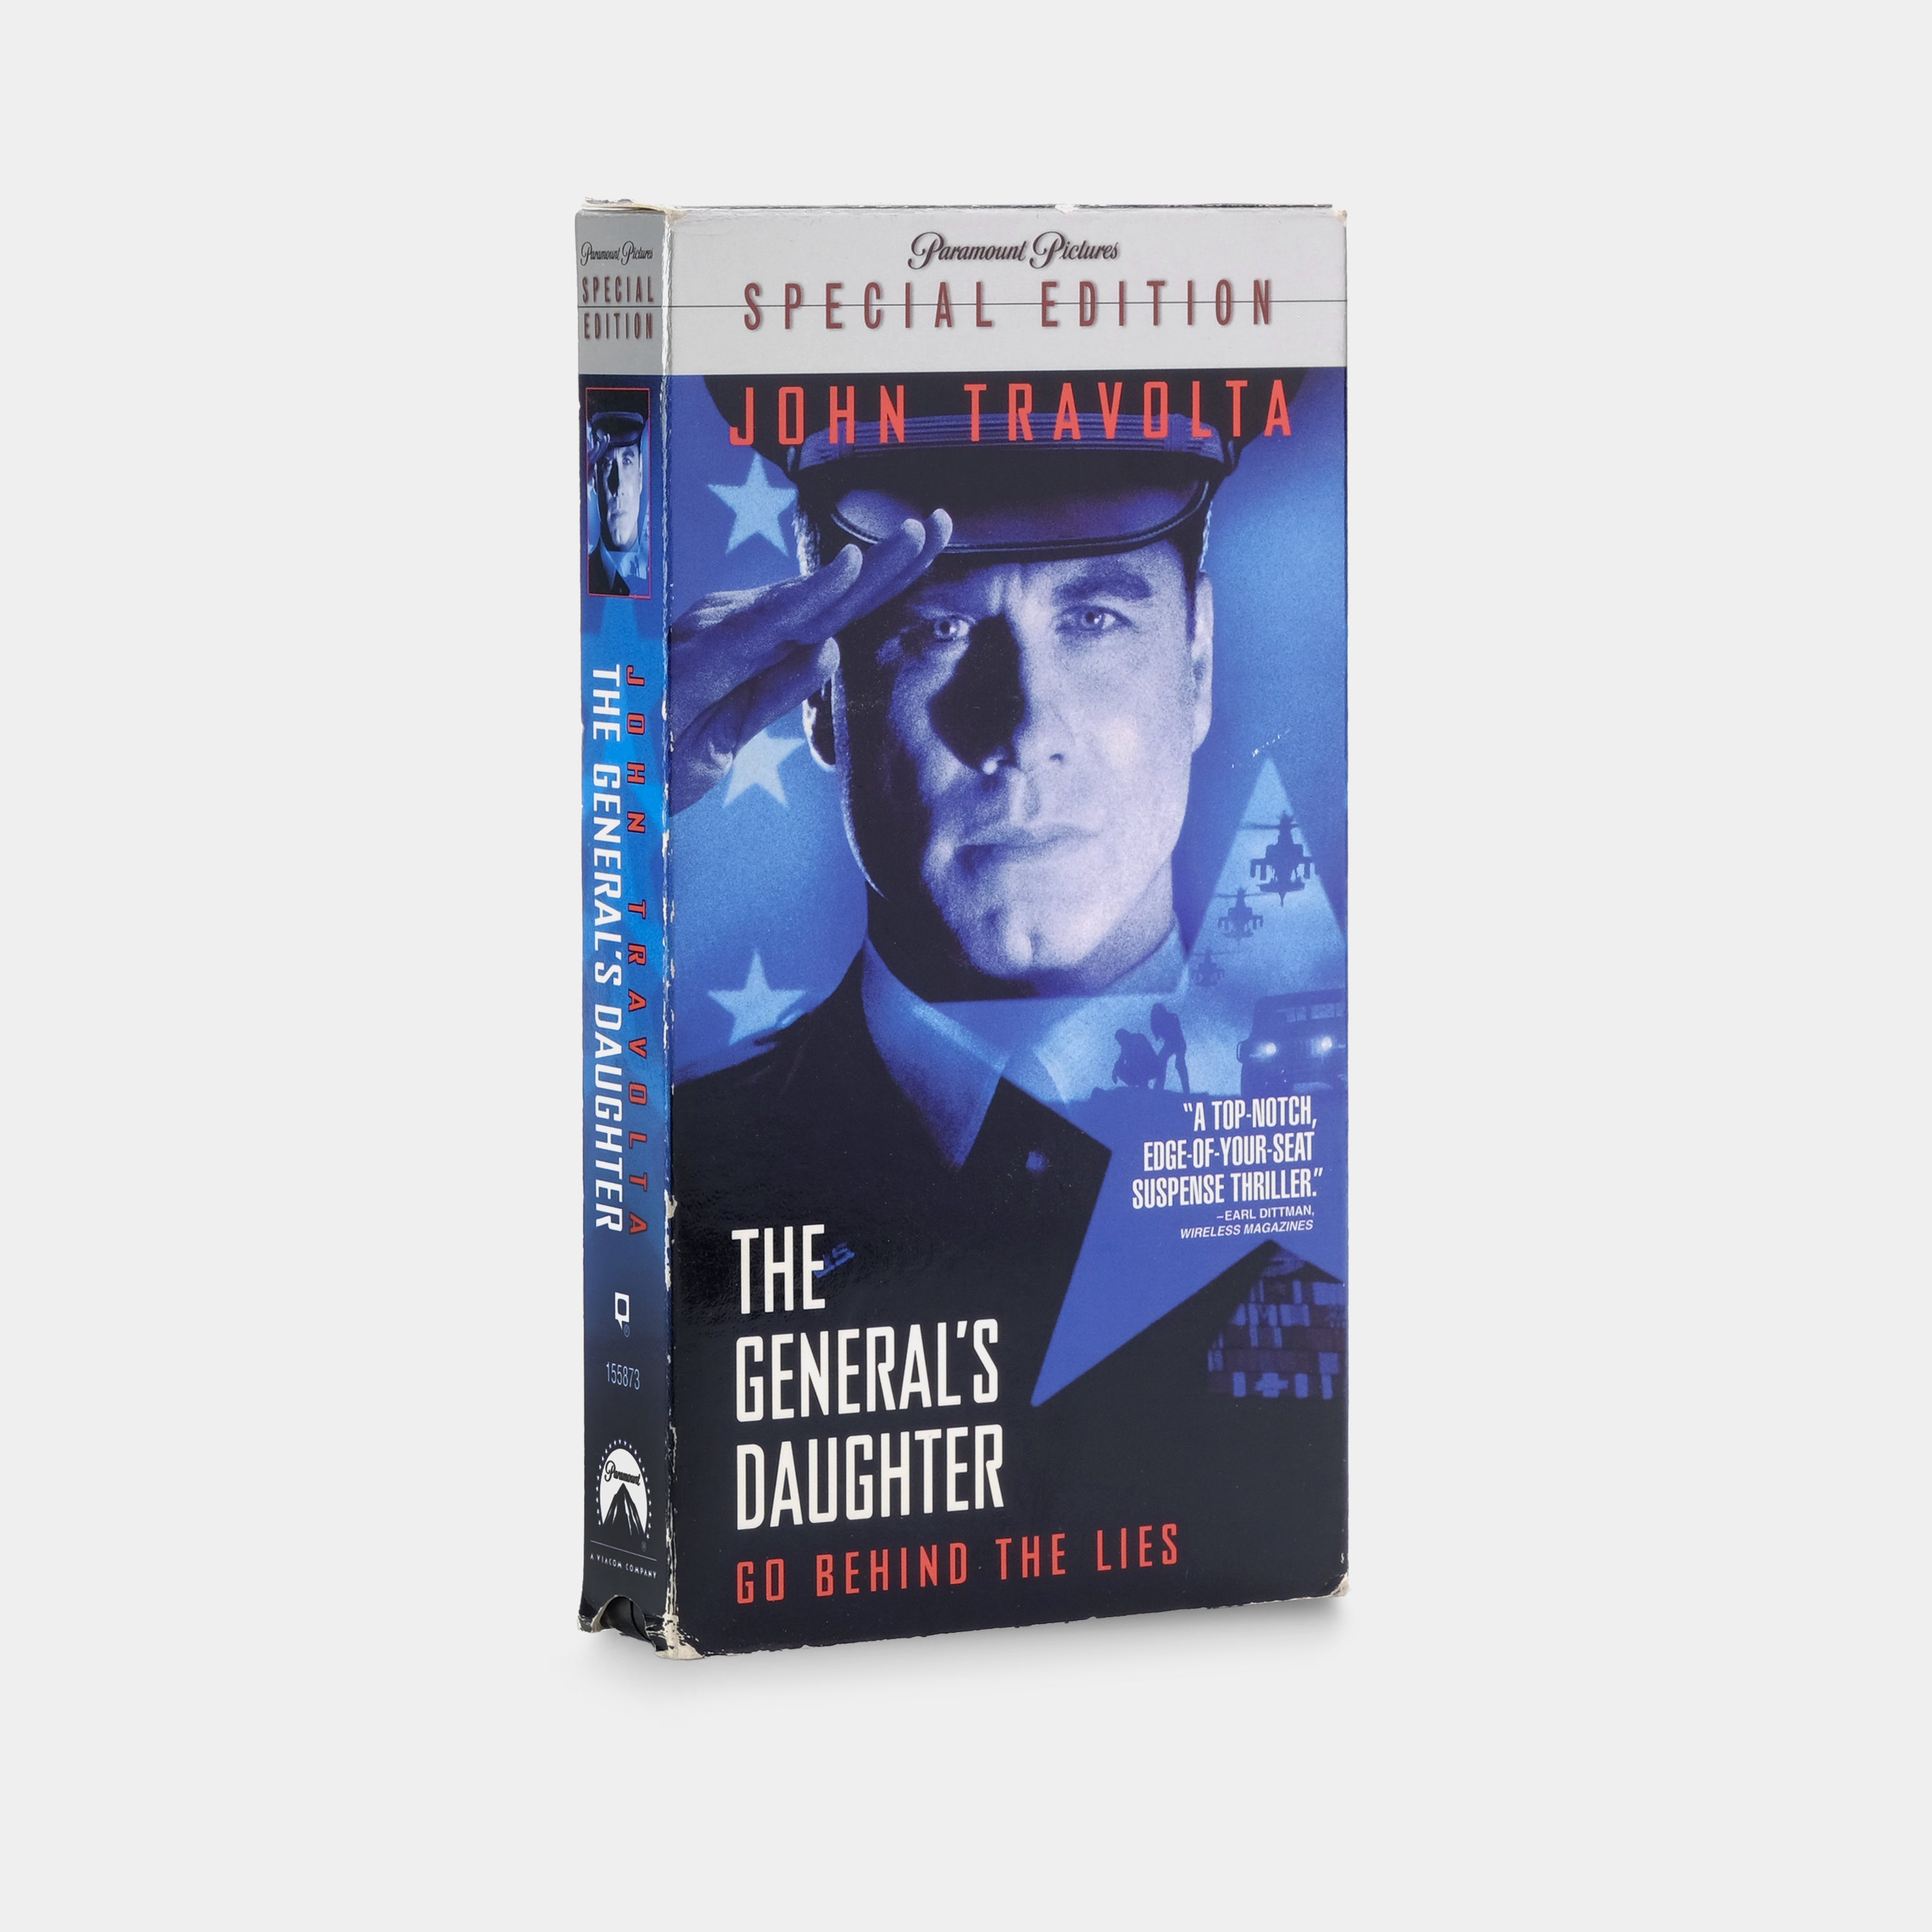 The General's Daughter VHS Tape